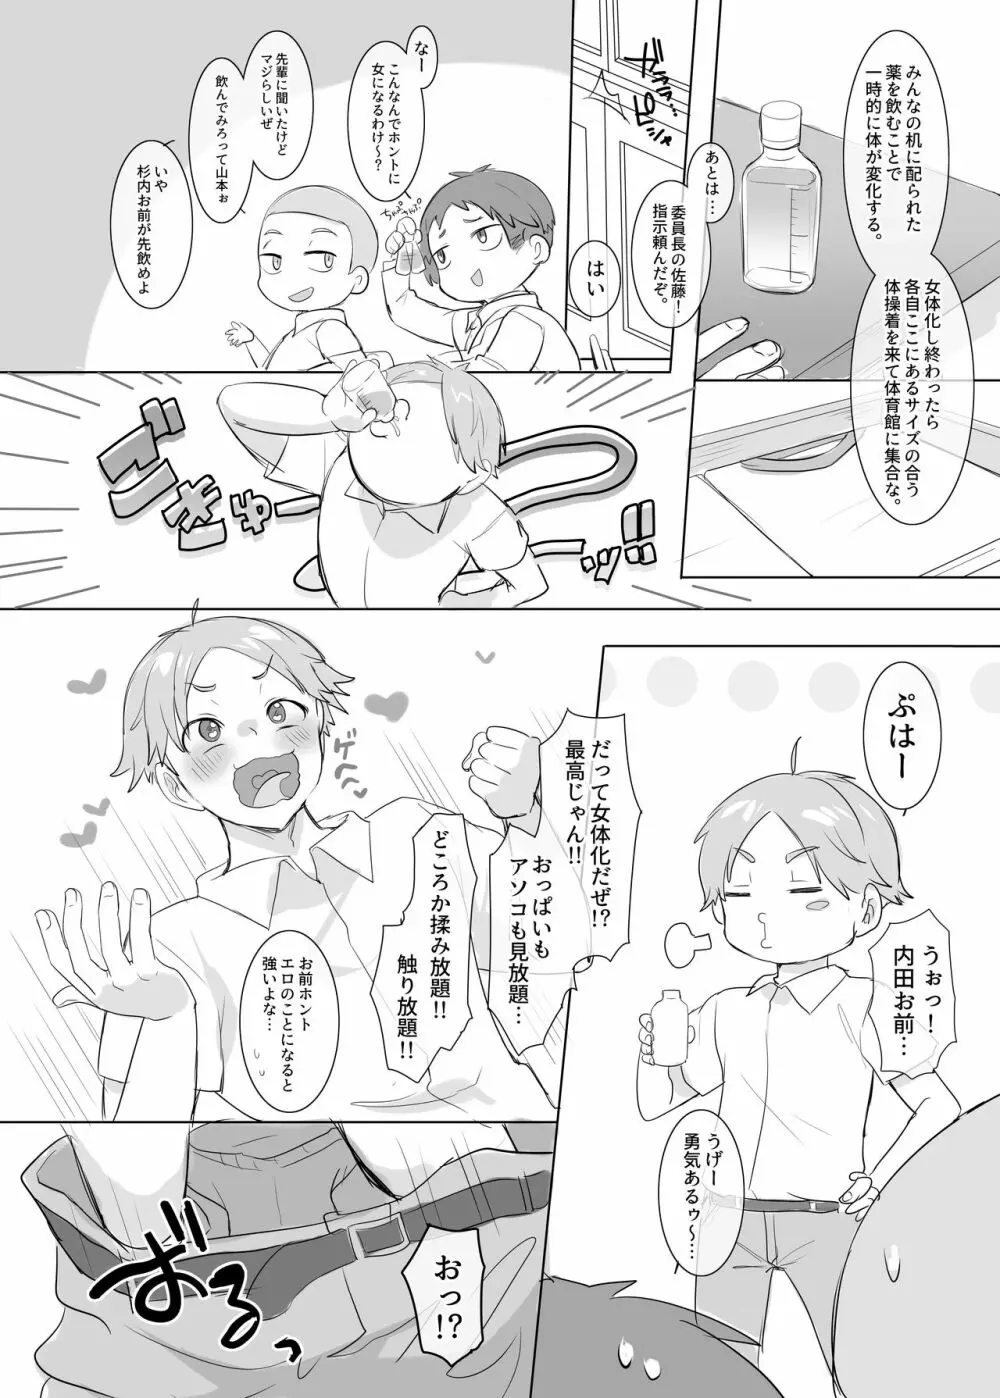 TS保健体育～クラス全員女体化授業～/佐藤くん編まとめ - page3